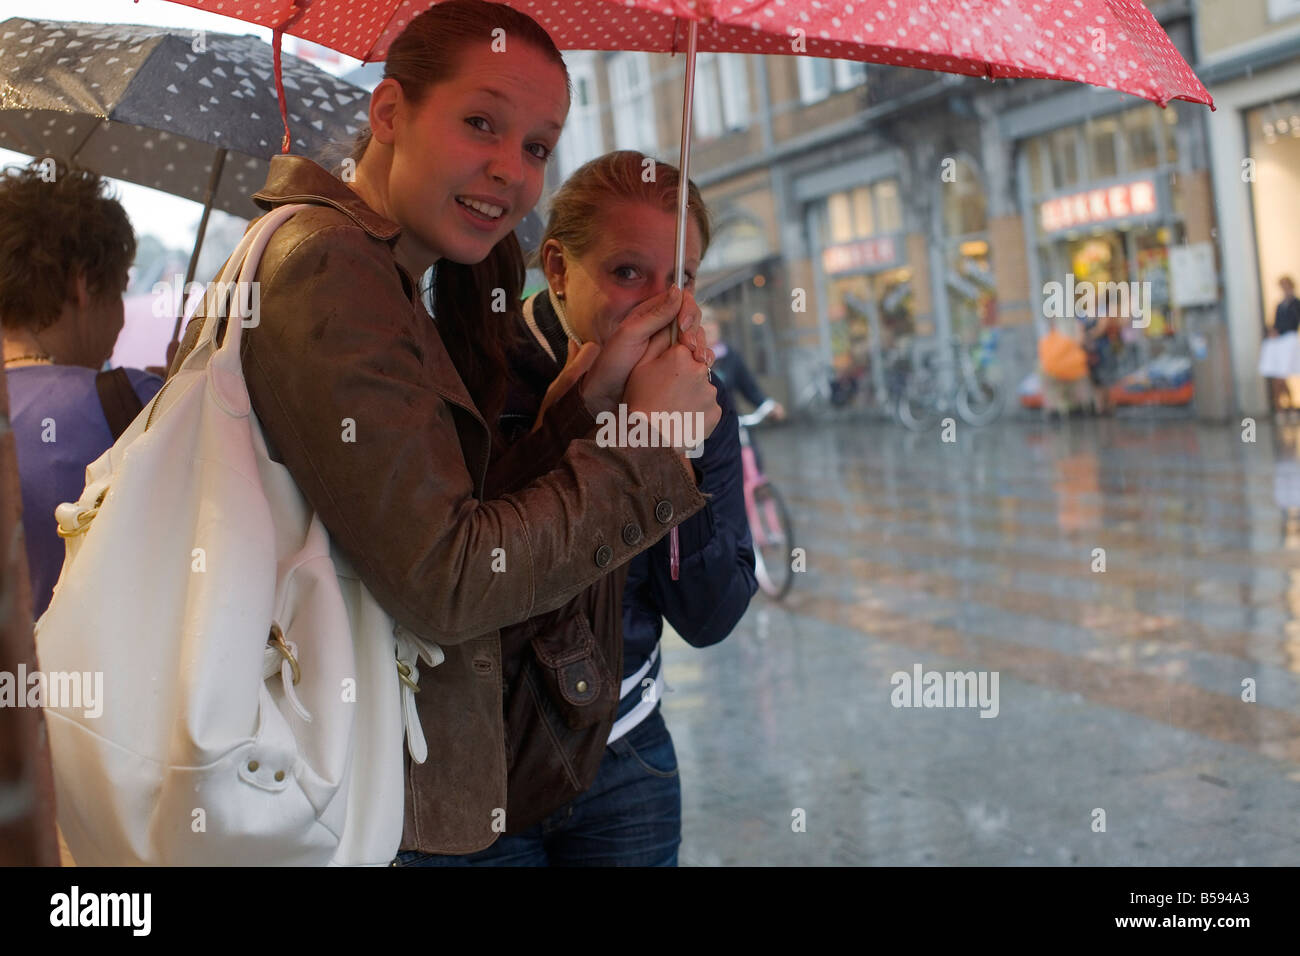 Two Girls sheltering under Umbrellas at a Rainshower. Stock Photo